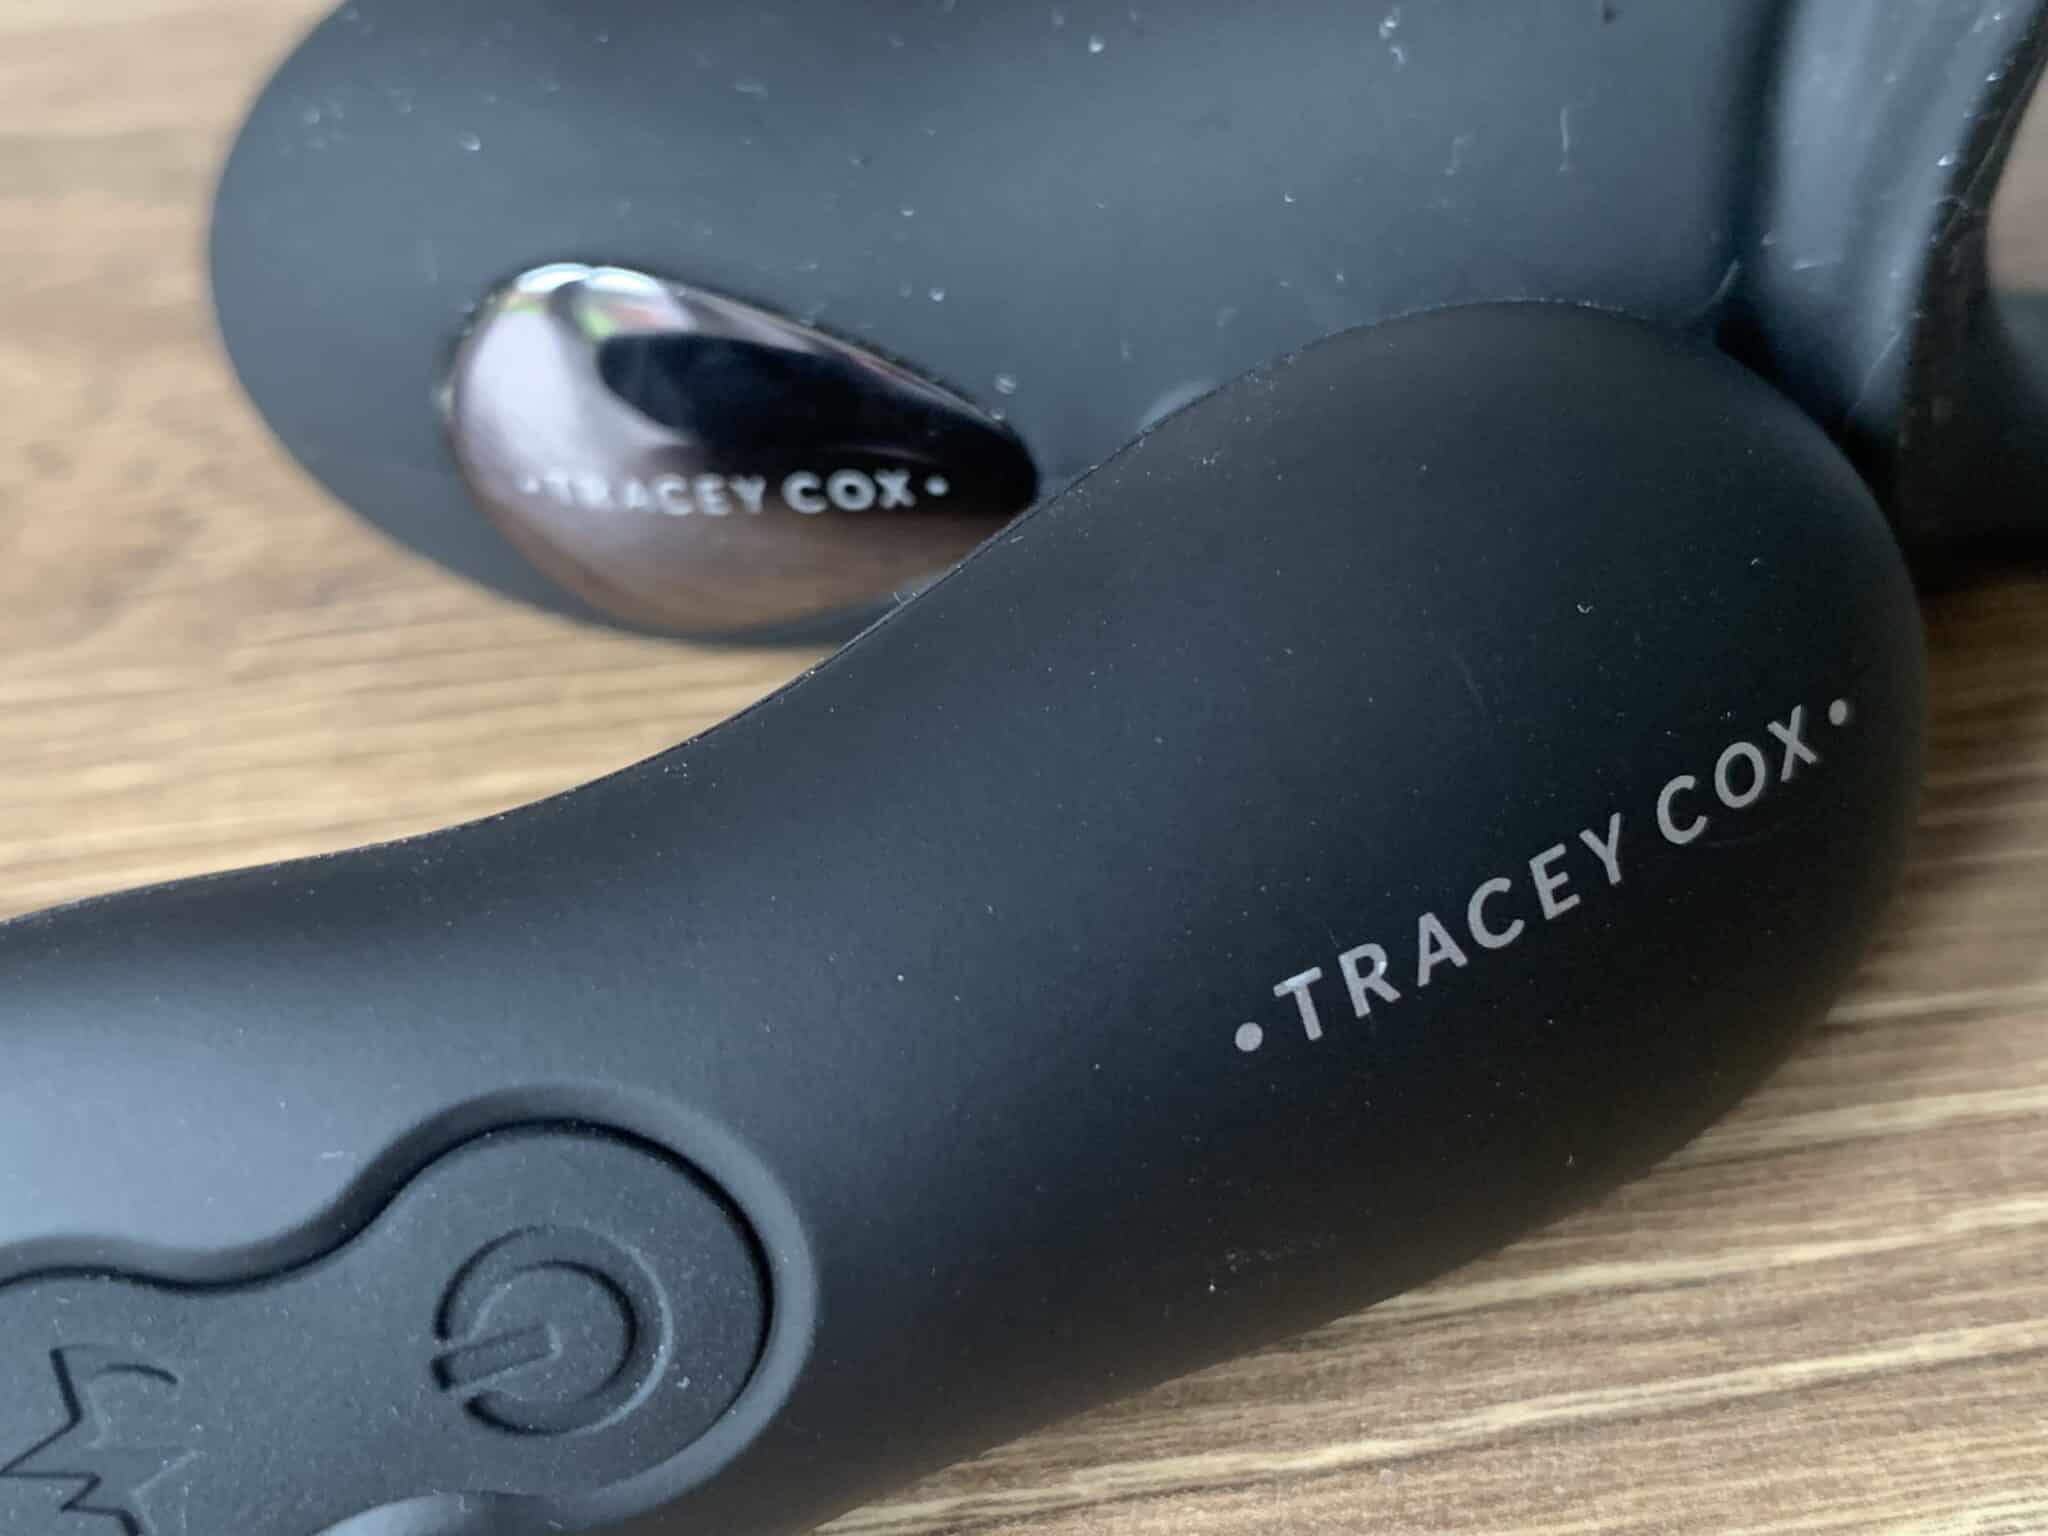 Tracey Cox EDGE Rechargeable Remote Control Penis Sleeve and Clitoral Stimulator The Tracey Cox EDGE Rechargeable Remote Control Penis Sleeve and Clitoral Stimulator: User Convenience Reviewed